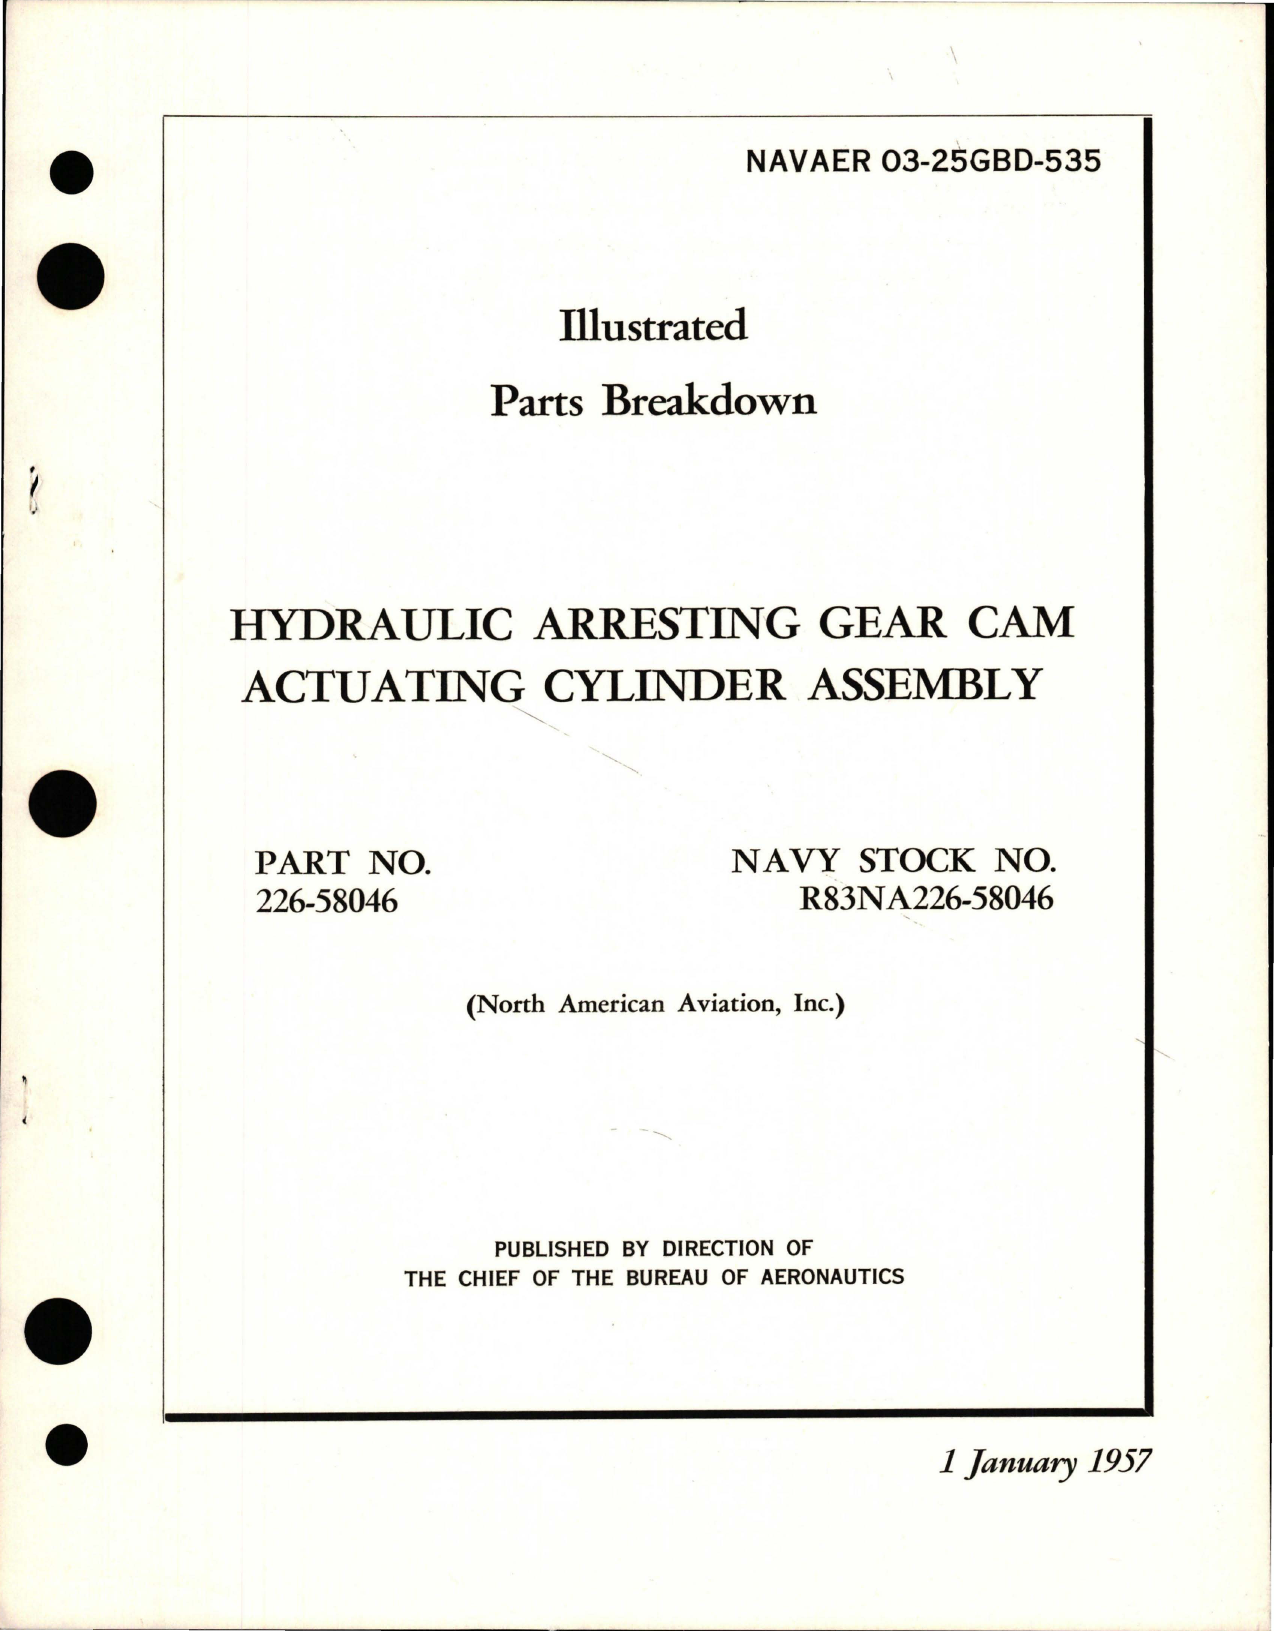 Sample page 1 from AirCorps Library document: Illustrated Parts Breakdown for Hydraulic Arresting Gear Cam Actuating Cylinder Assy - Part 226-58046 